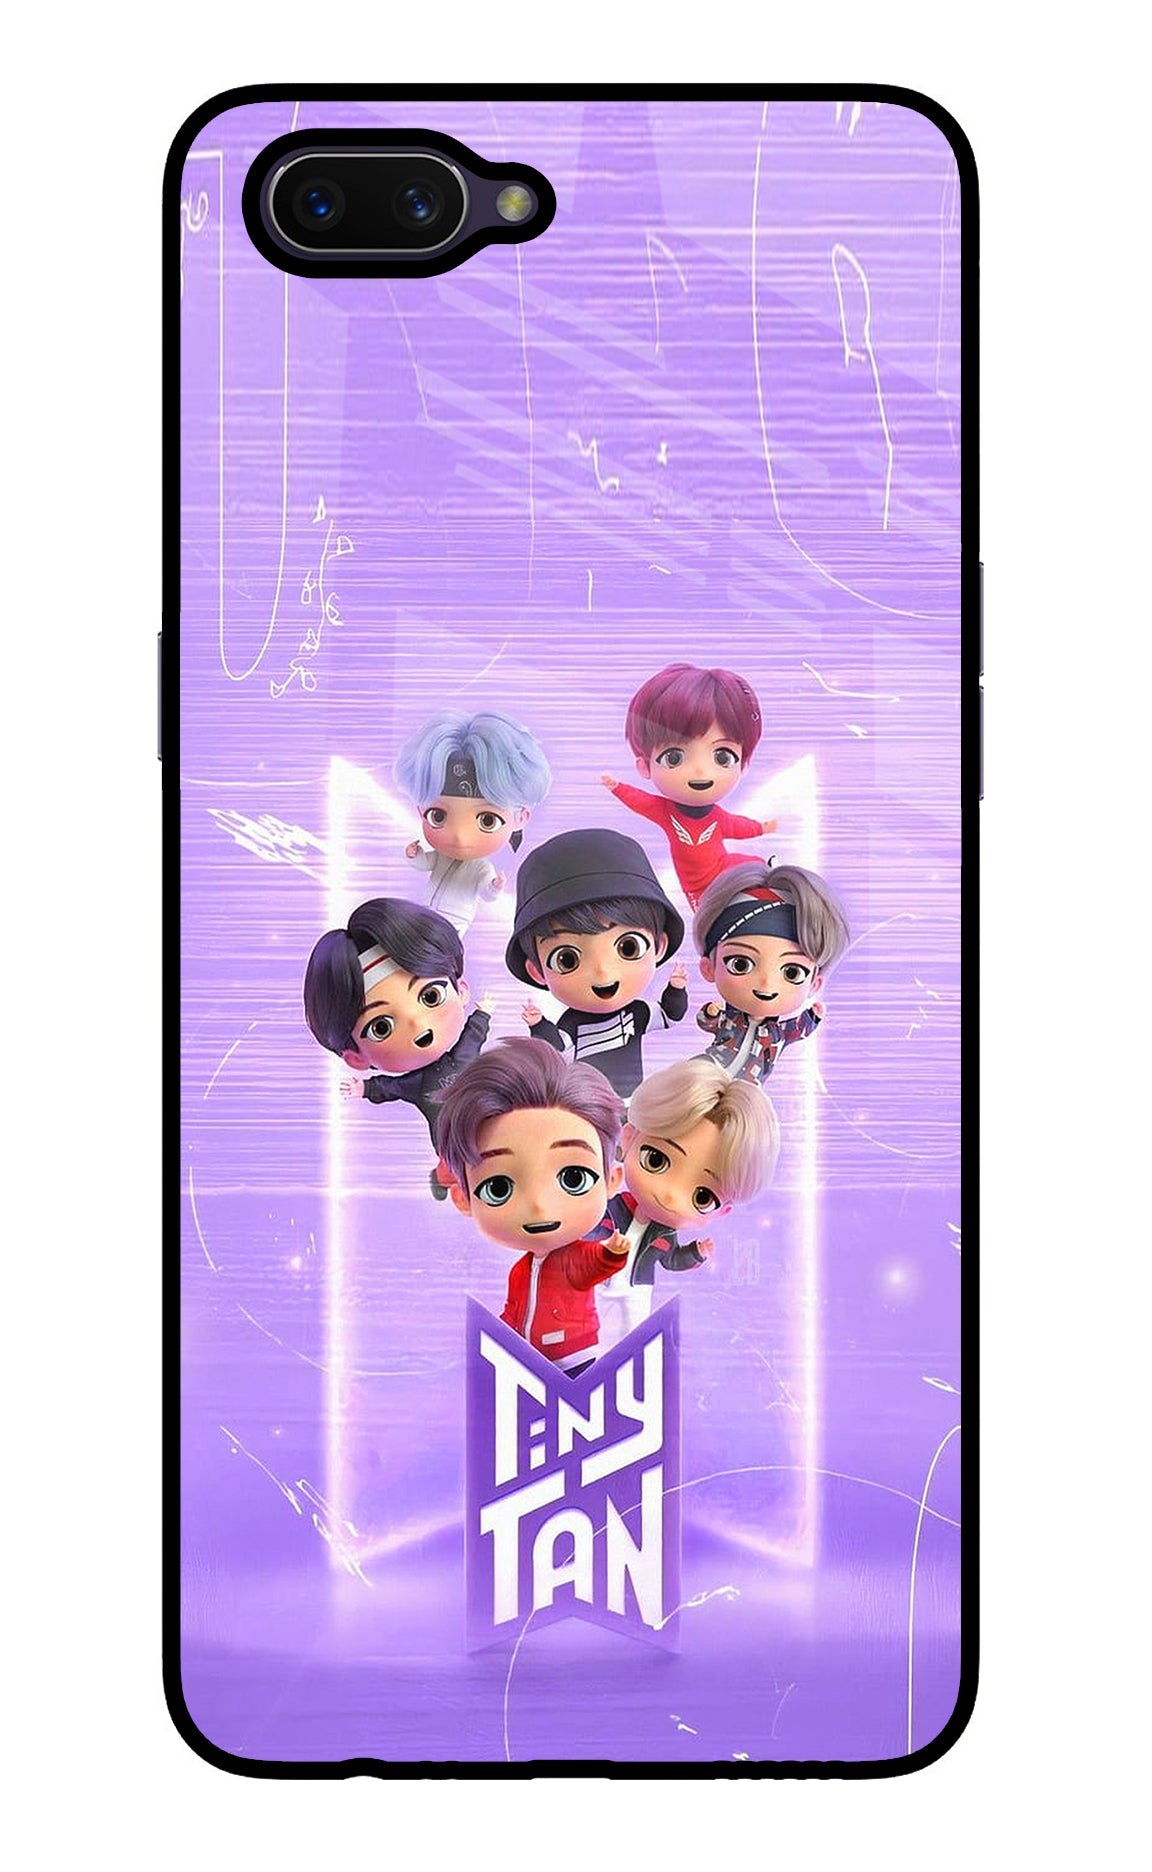 BTS Tiny Tan Oppo A3S Glass Case